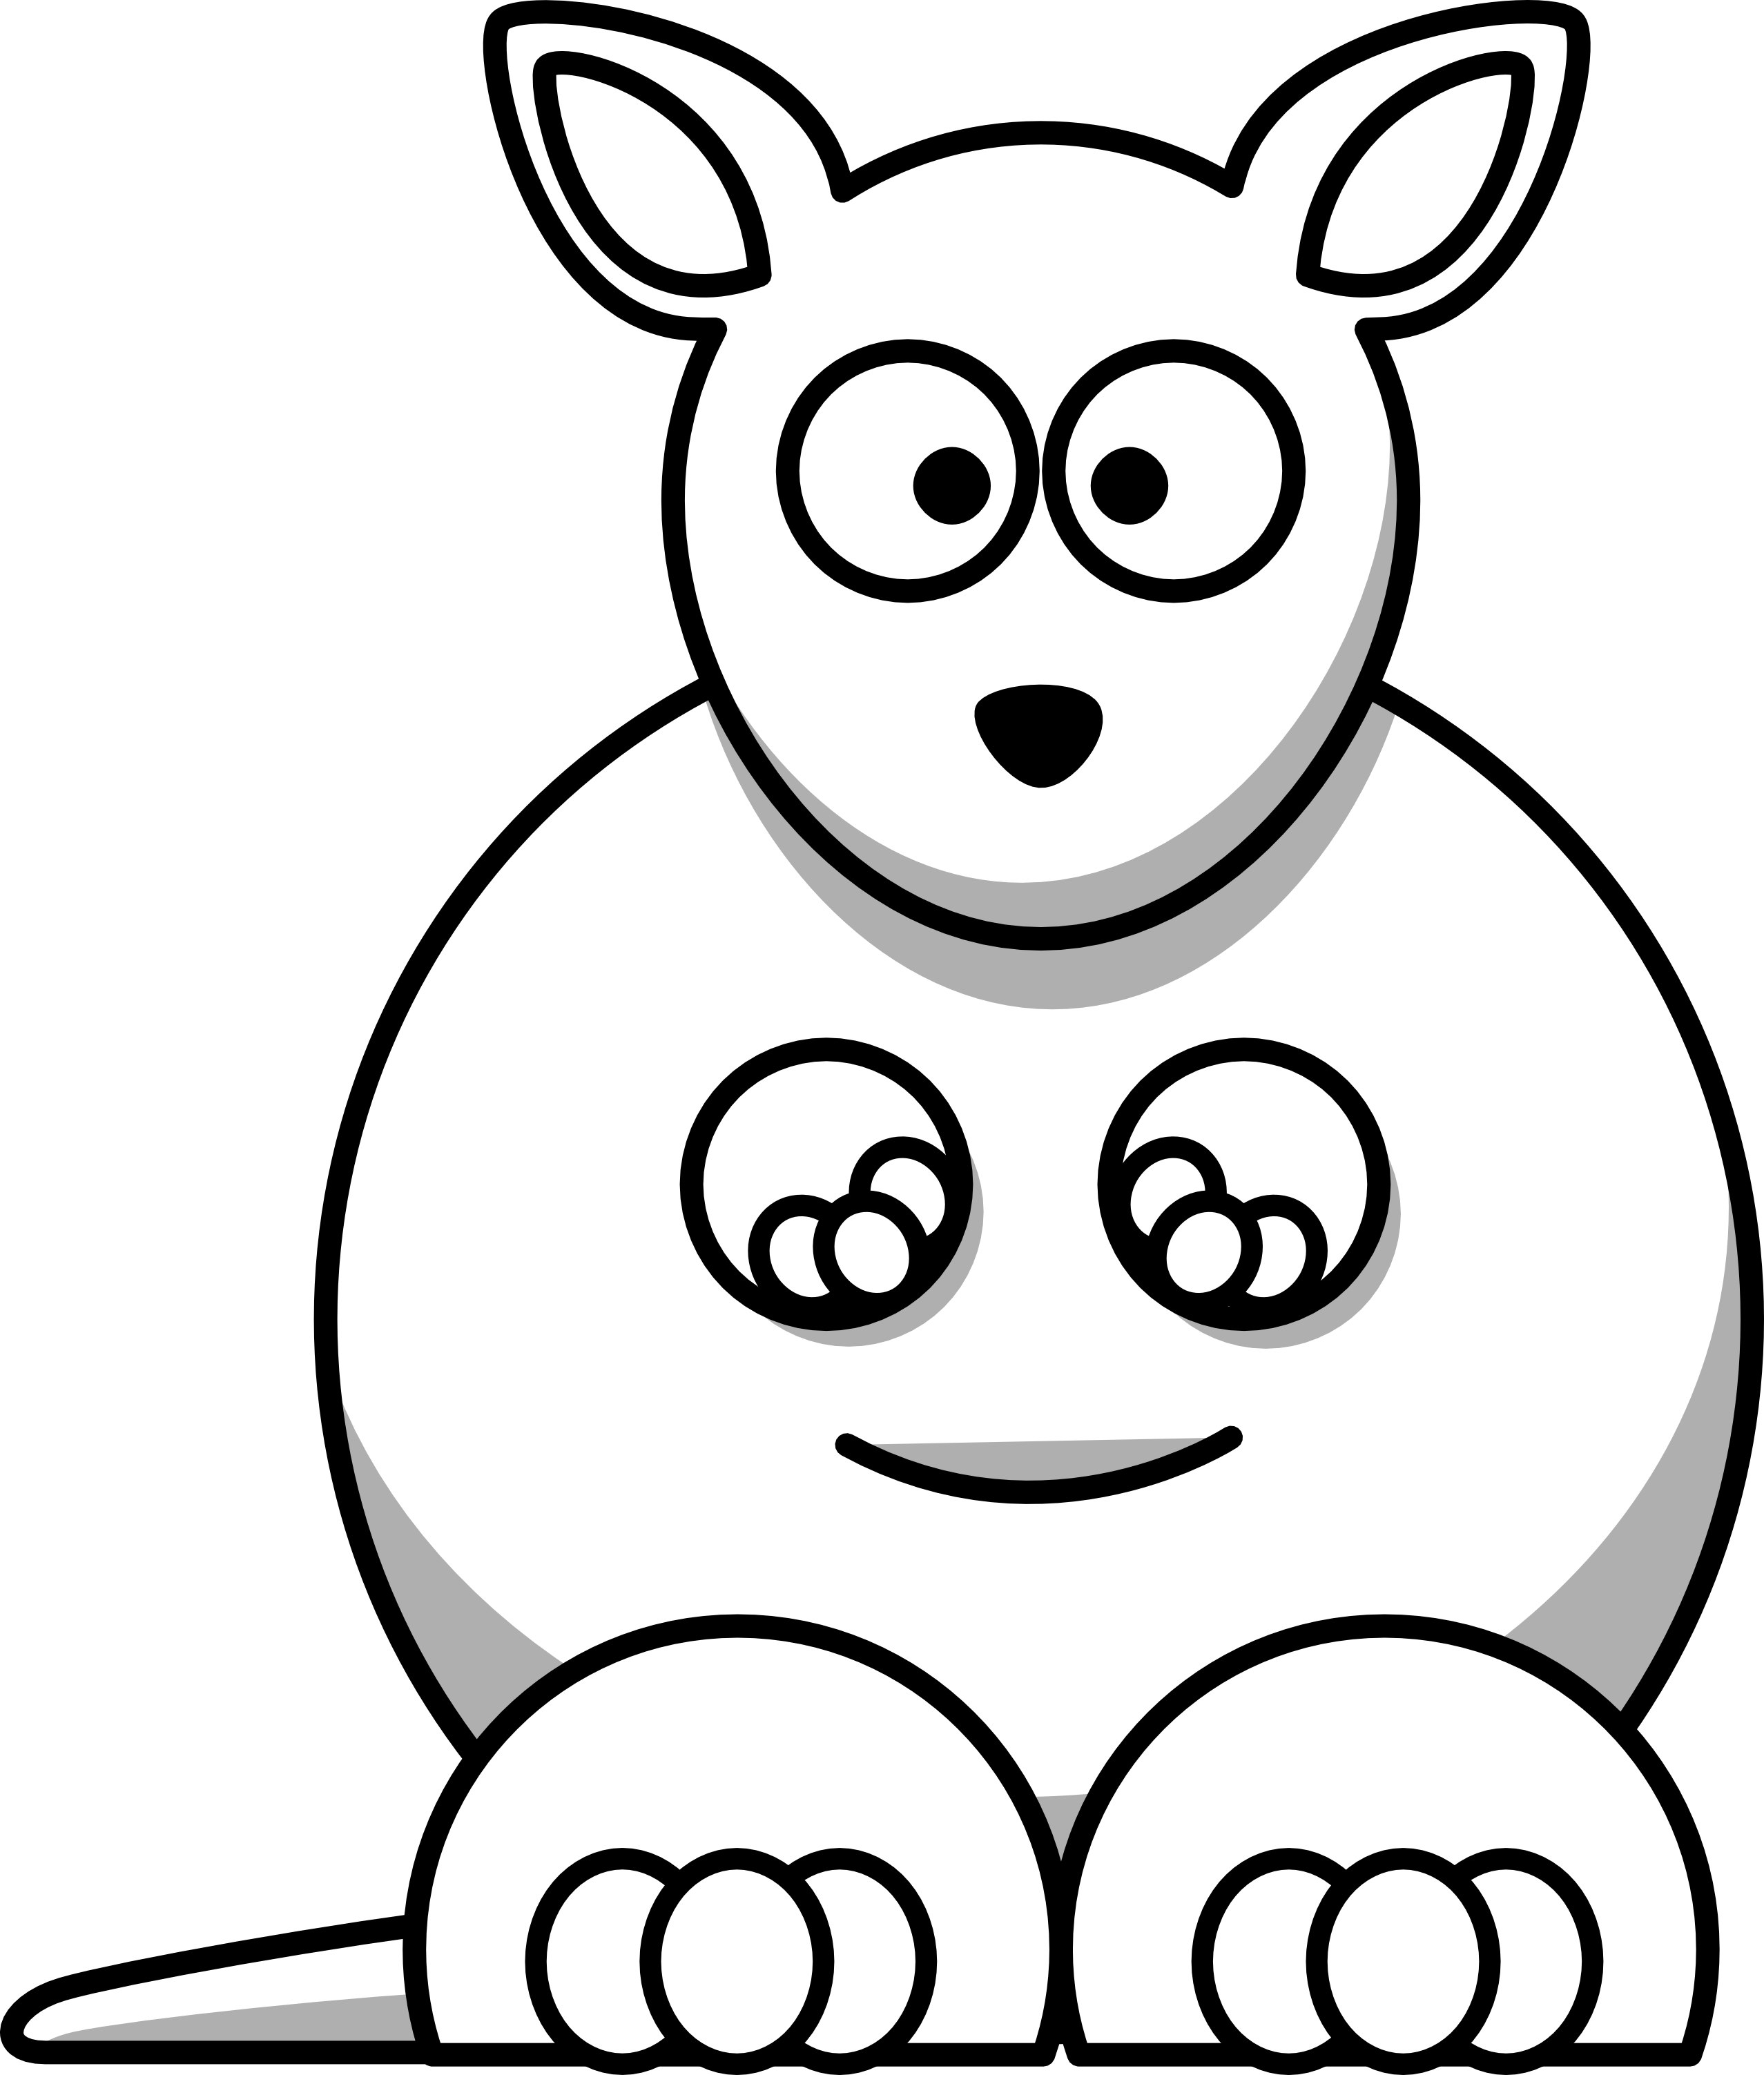 21 Black And White Cartoon Animals   Free Cliparts That You Can